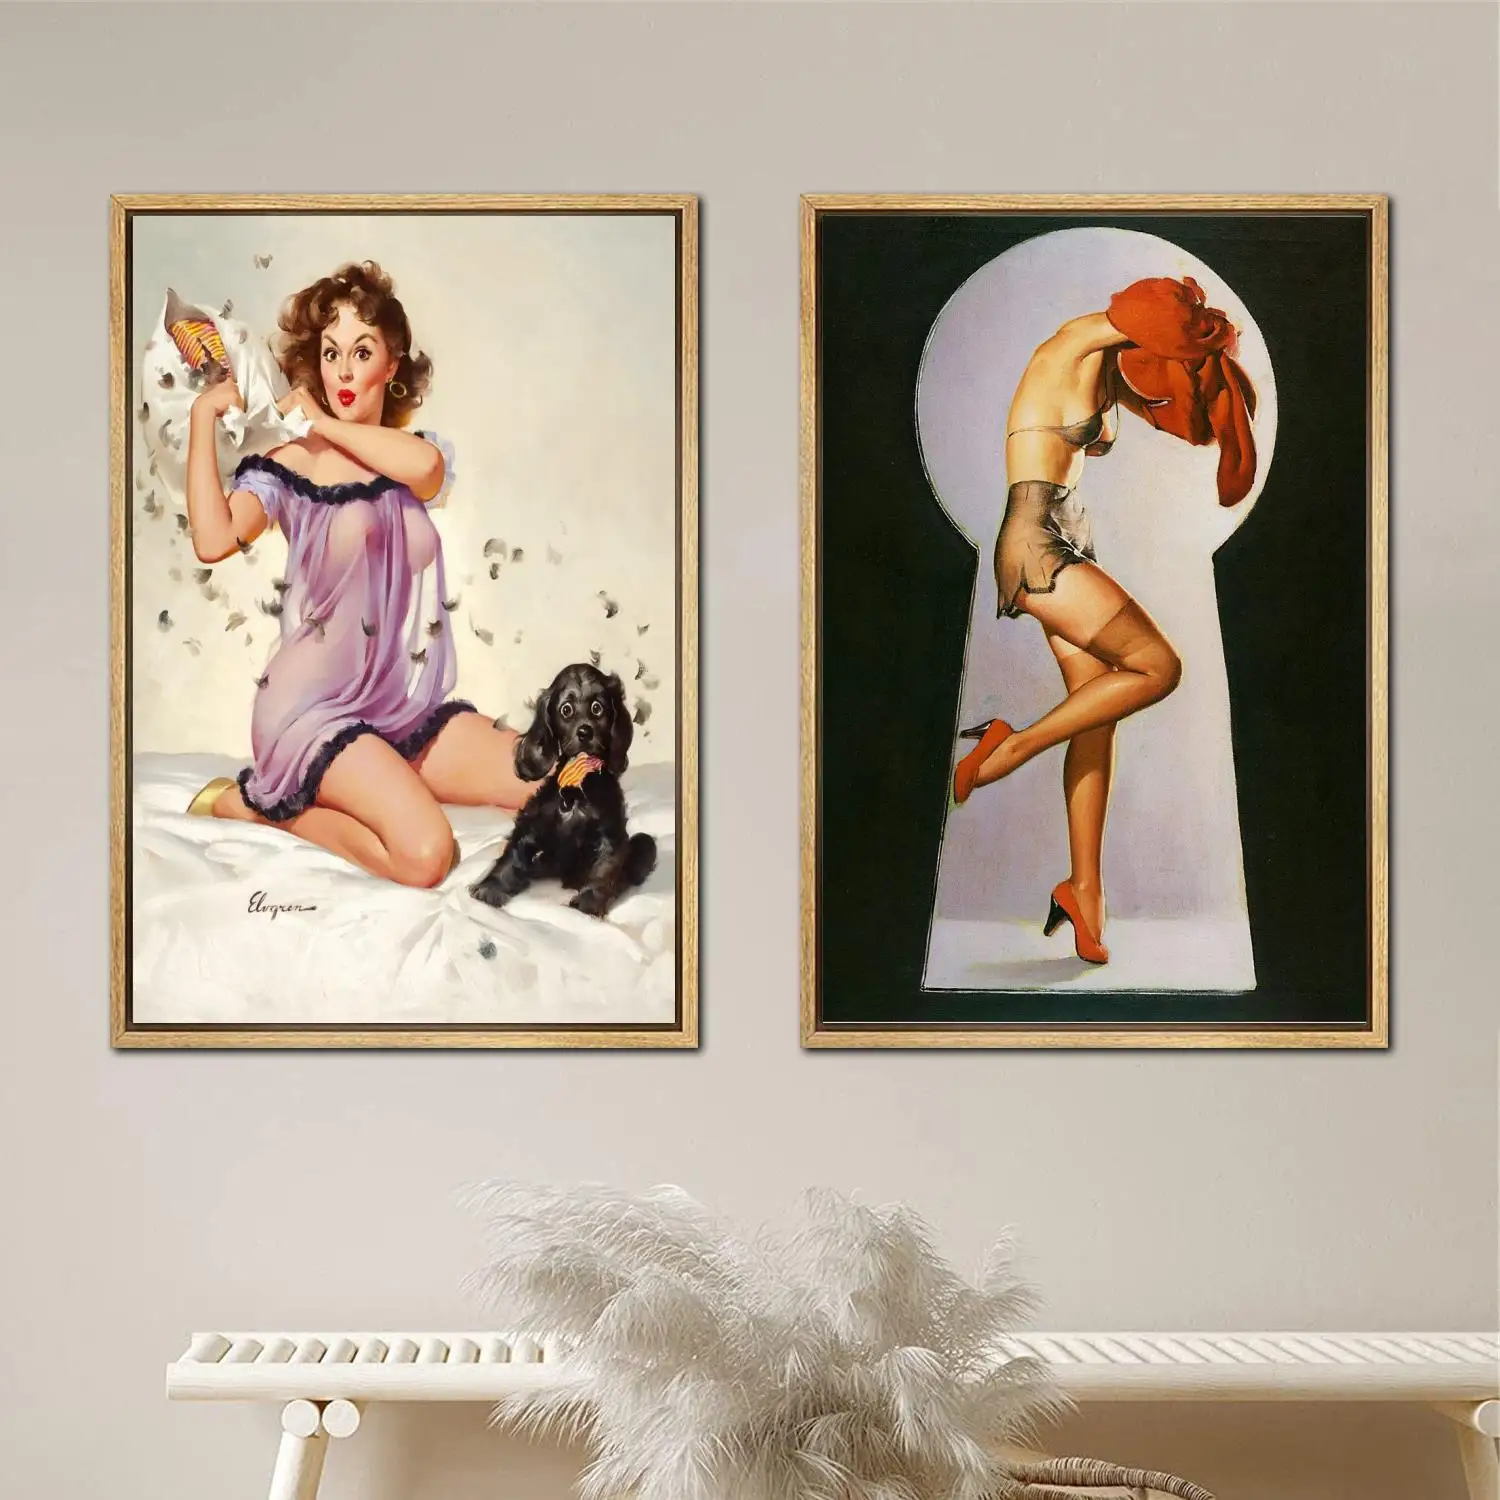 gil elvgren Poster Painting 24x36 Wall Art Canvas Posters room decor Modern Family bedroom Decoration Art wall decor